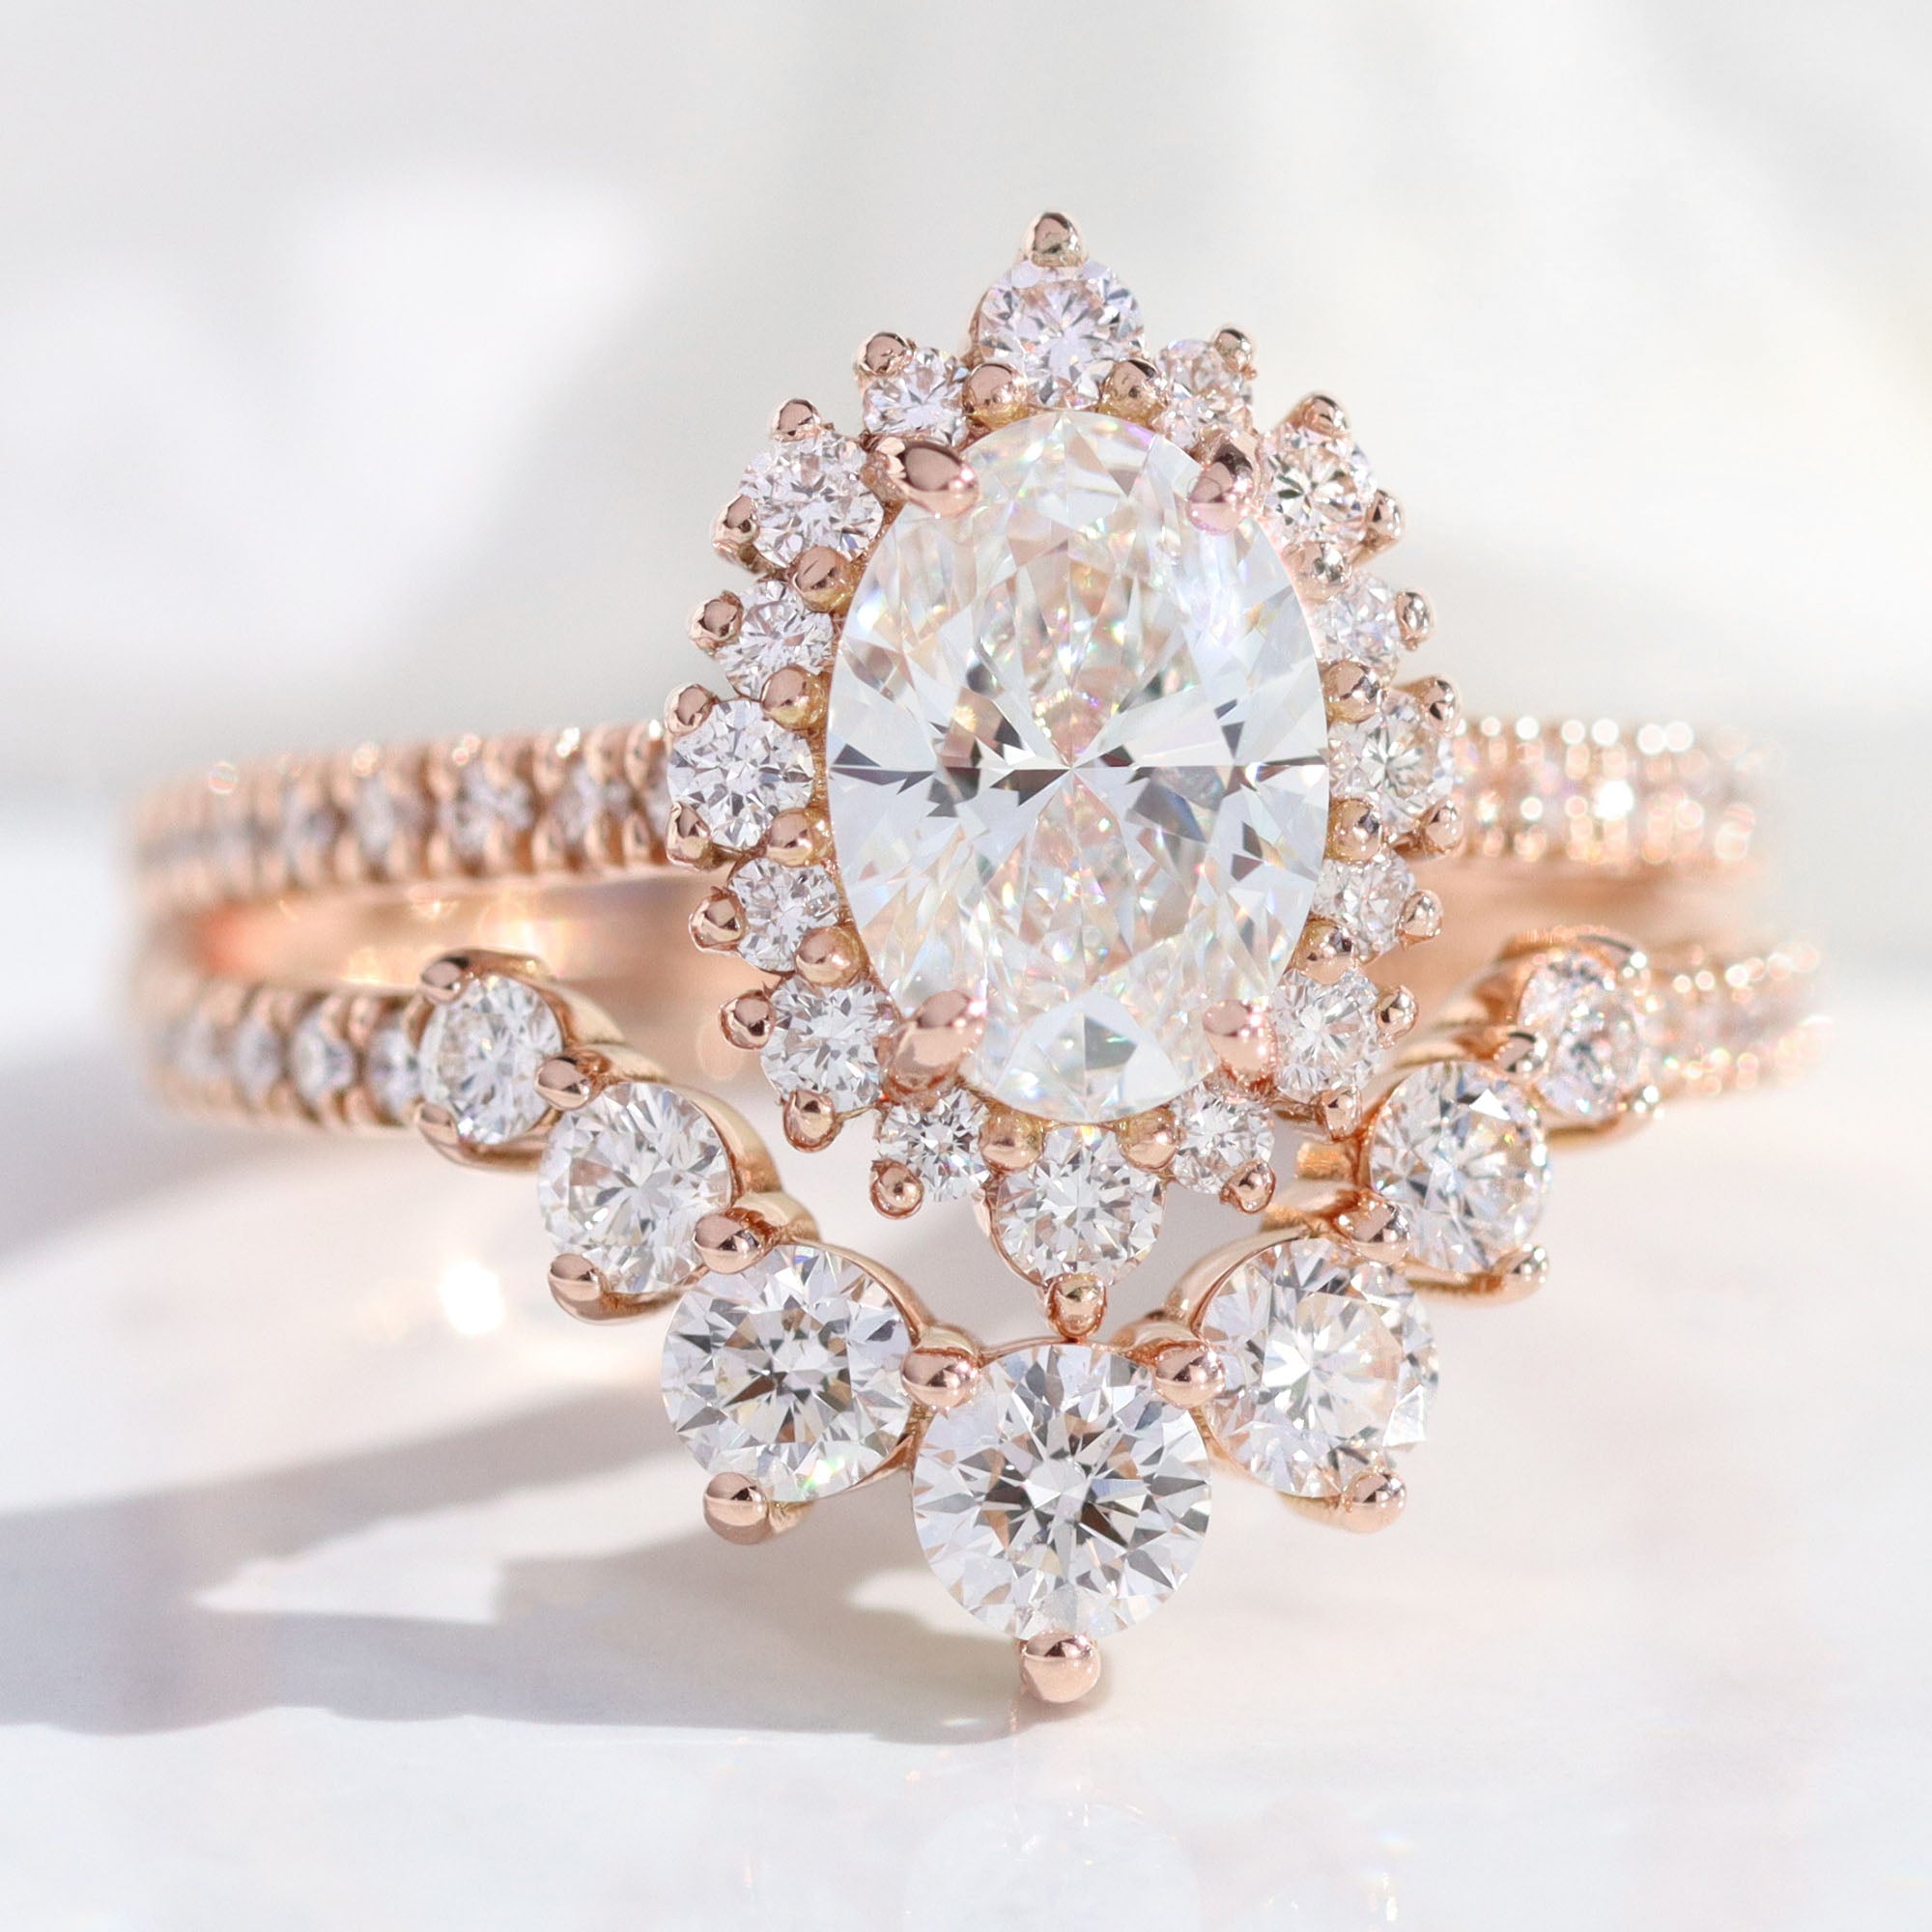 Micropave Laboratory Grown Lab Diamond Engagement Ring In 14K Rose Gold